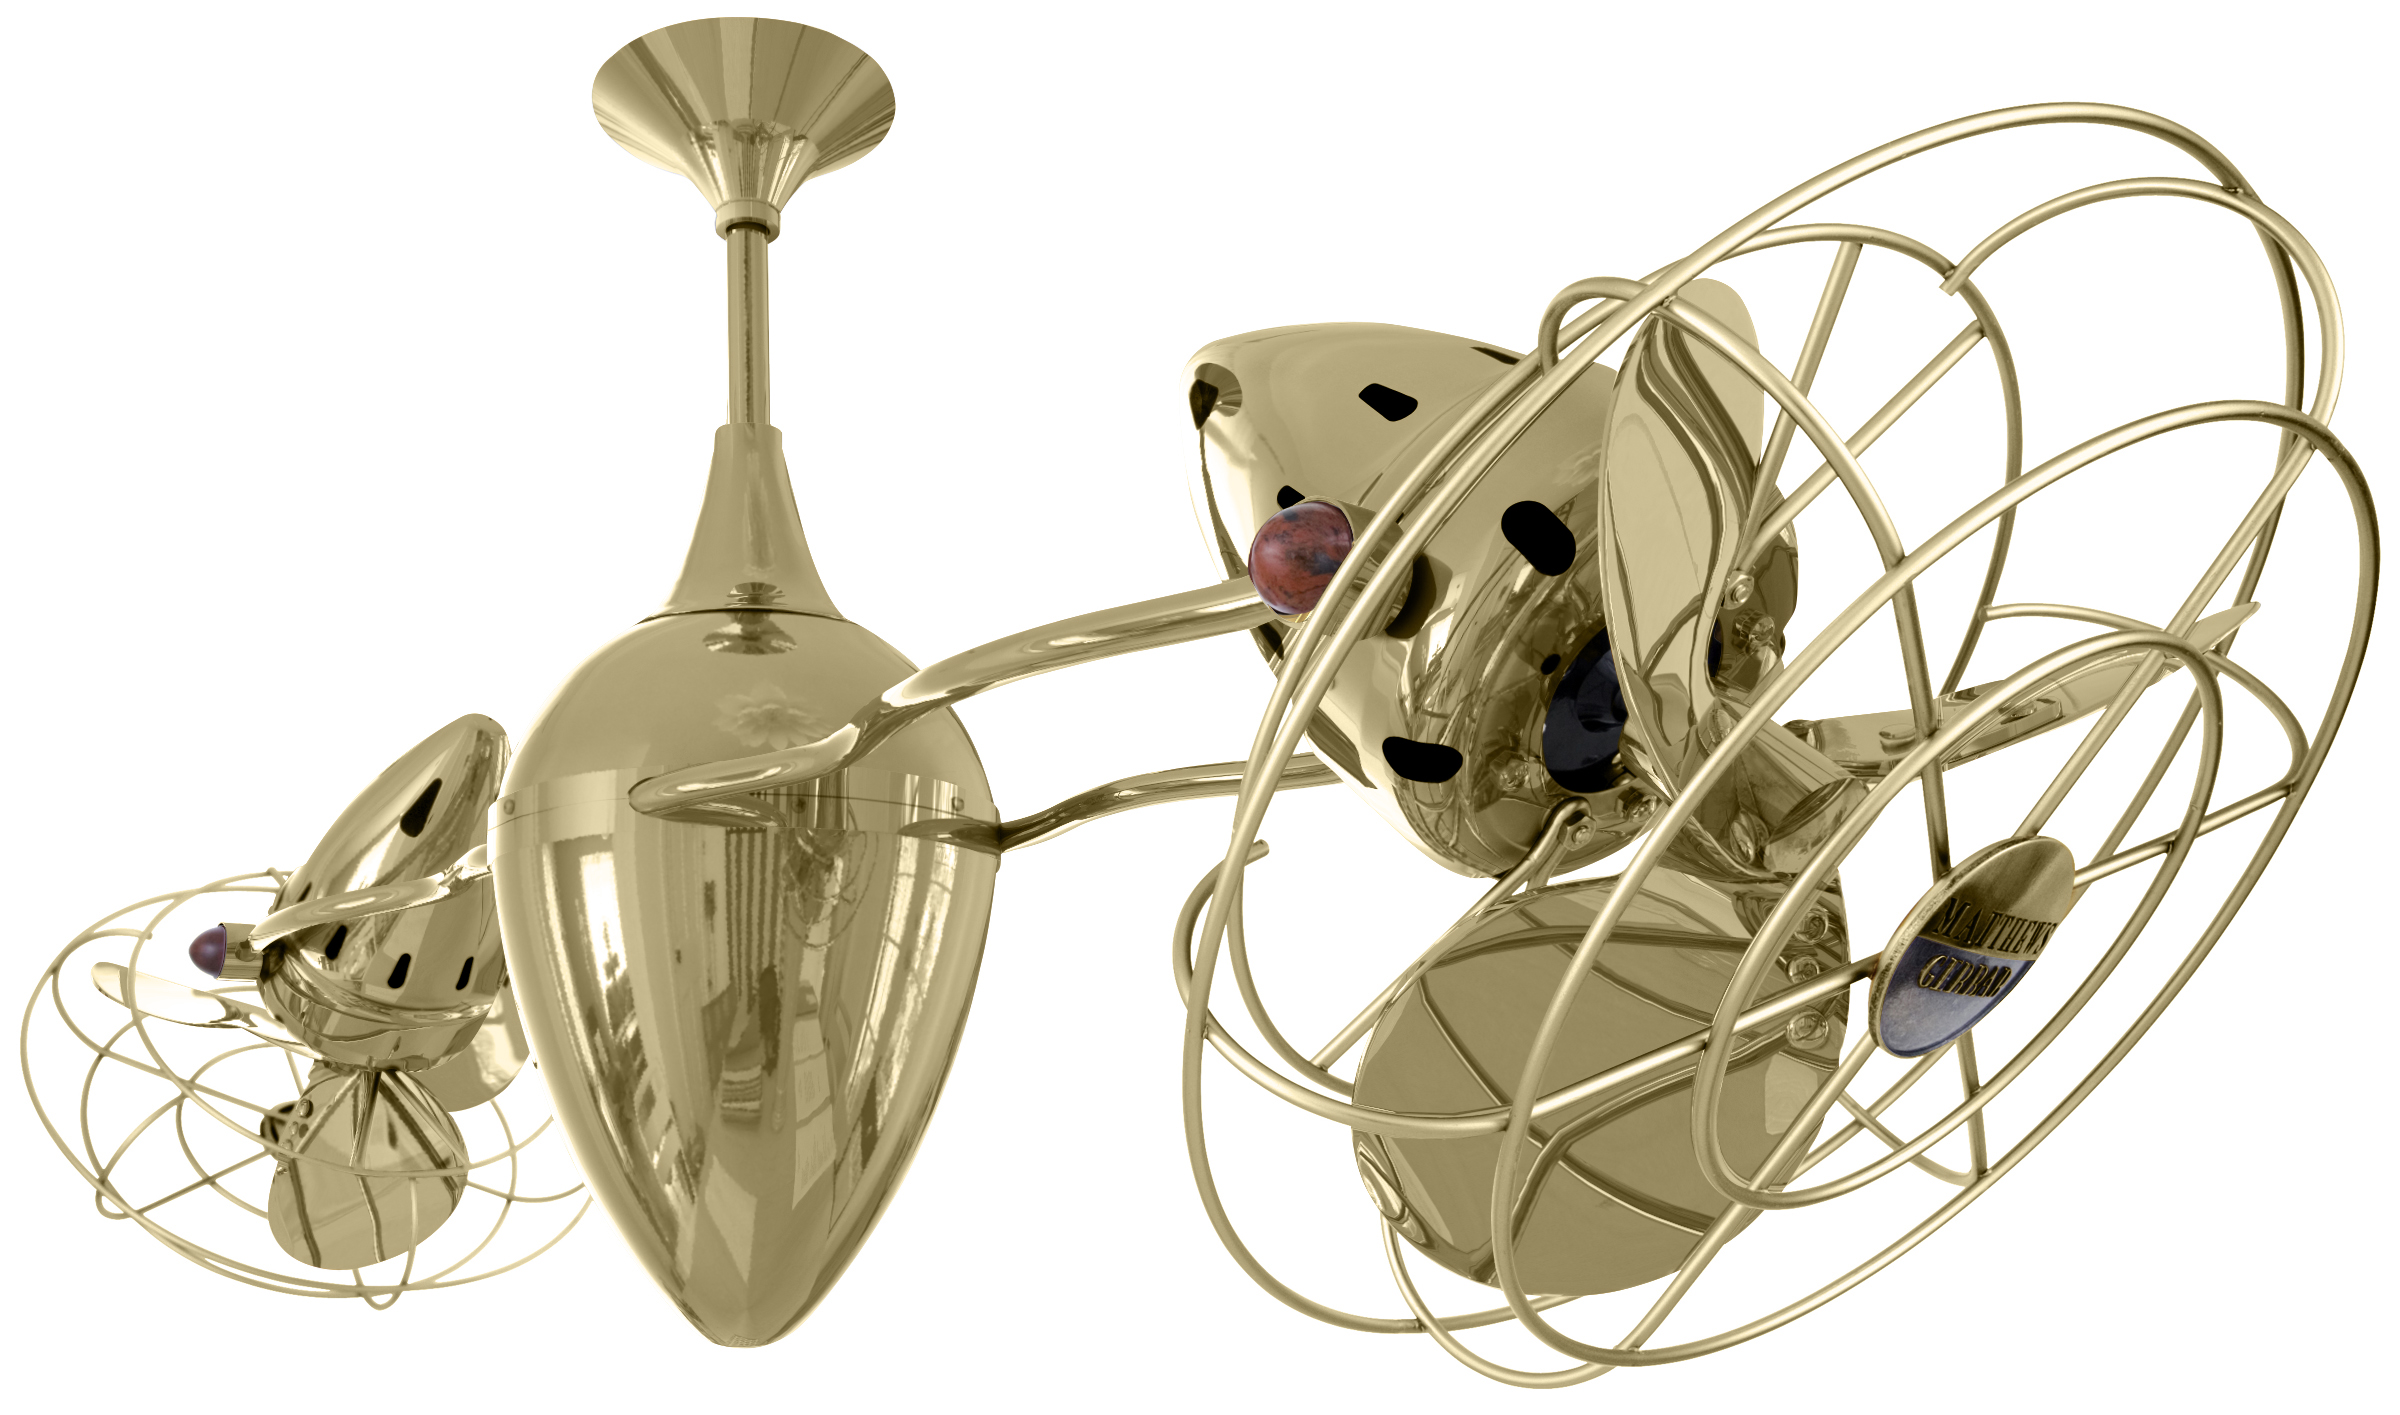 Ar Ruthiane dual headed rotational ceiling fan in polished brass with metal blades and decorative cage made by Matthews Fan Company.